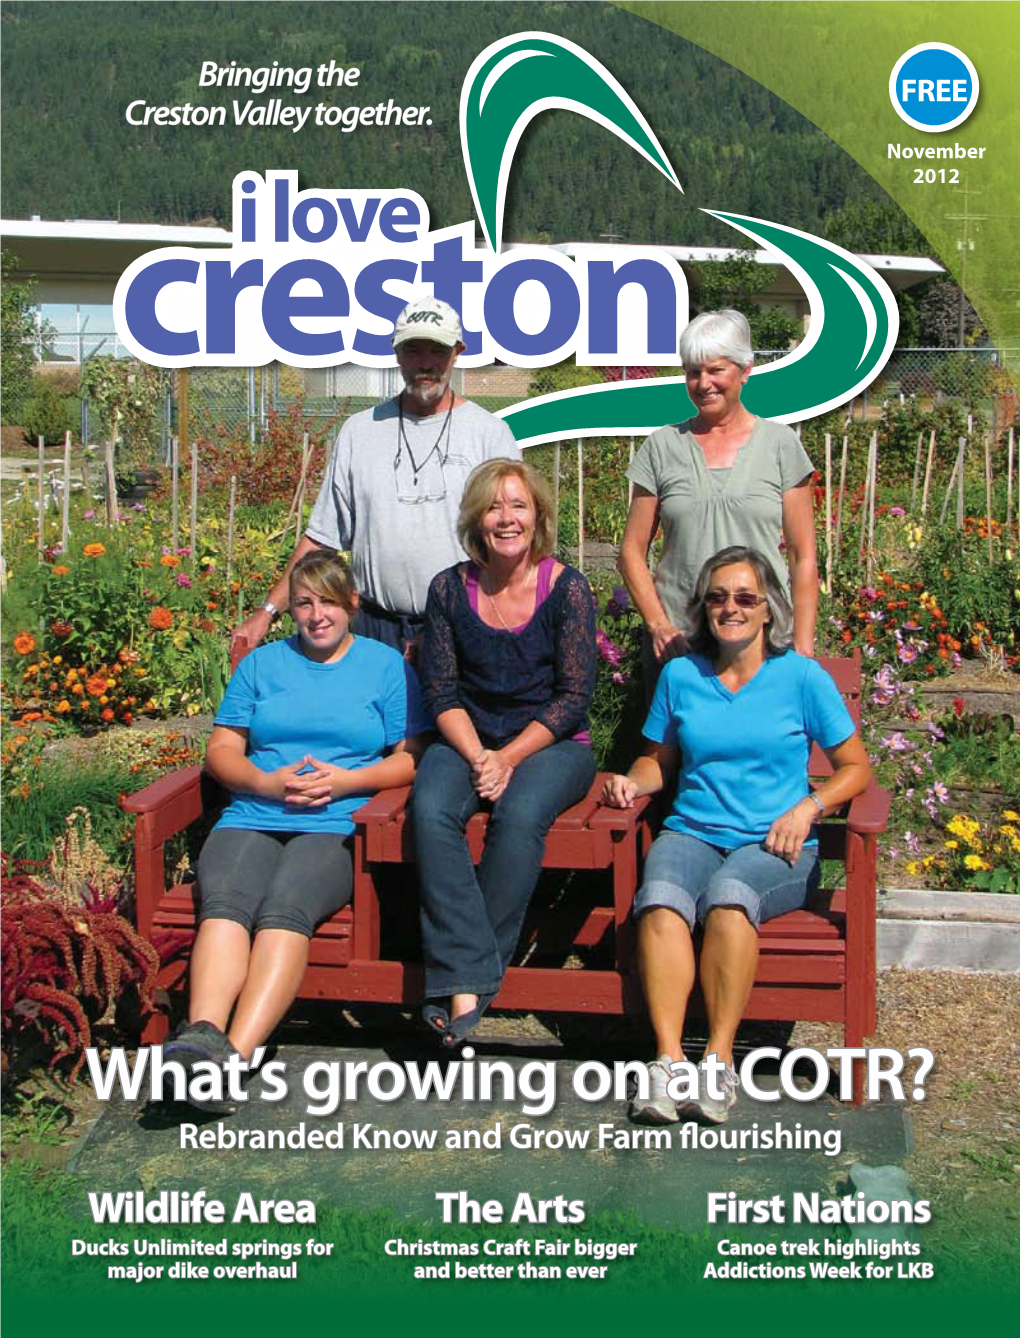 What's Growing on at COTR?